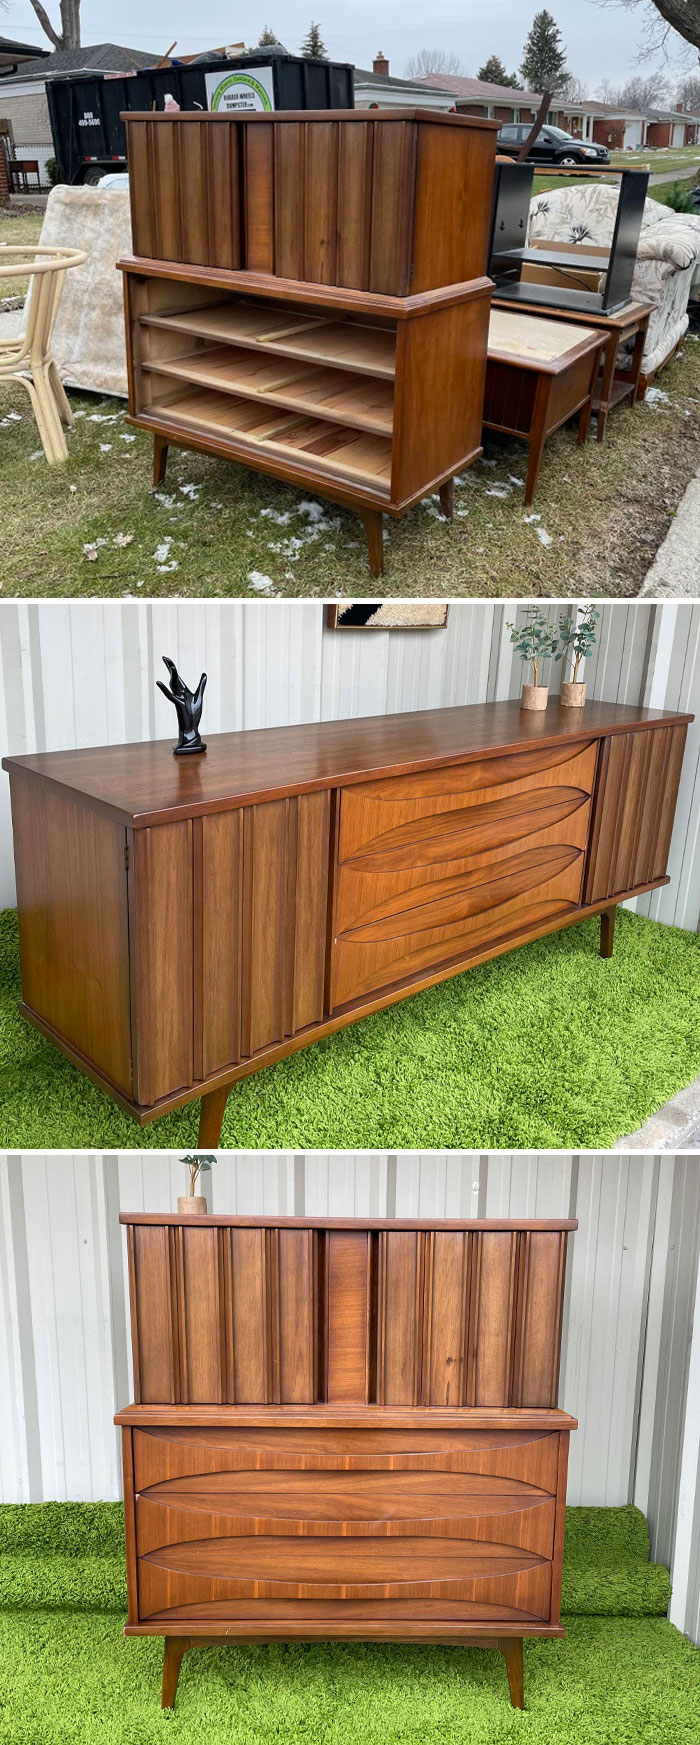 Curb Alert. Someone Posted A Curb Alert Near Me And I Saw Two Mid Century Looking Dressers In The Corner. I Am Still In Awe